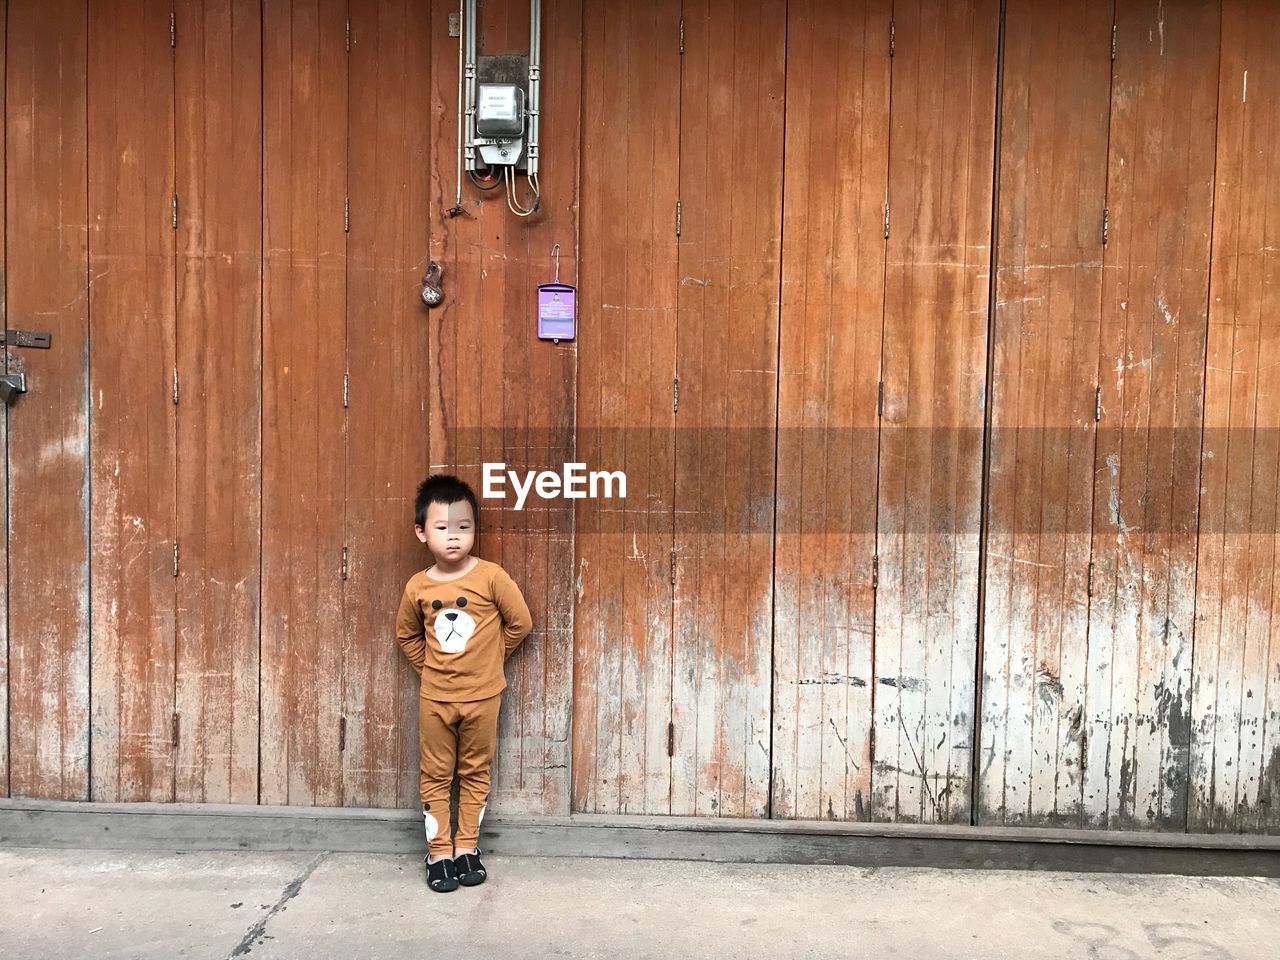 Boy standing against wooden wall